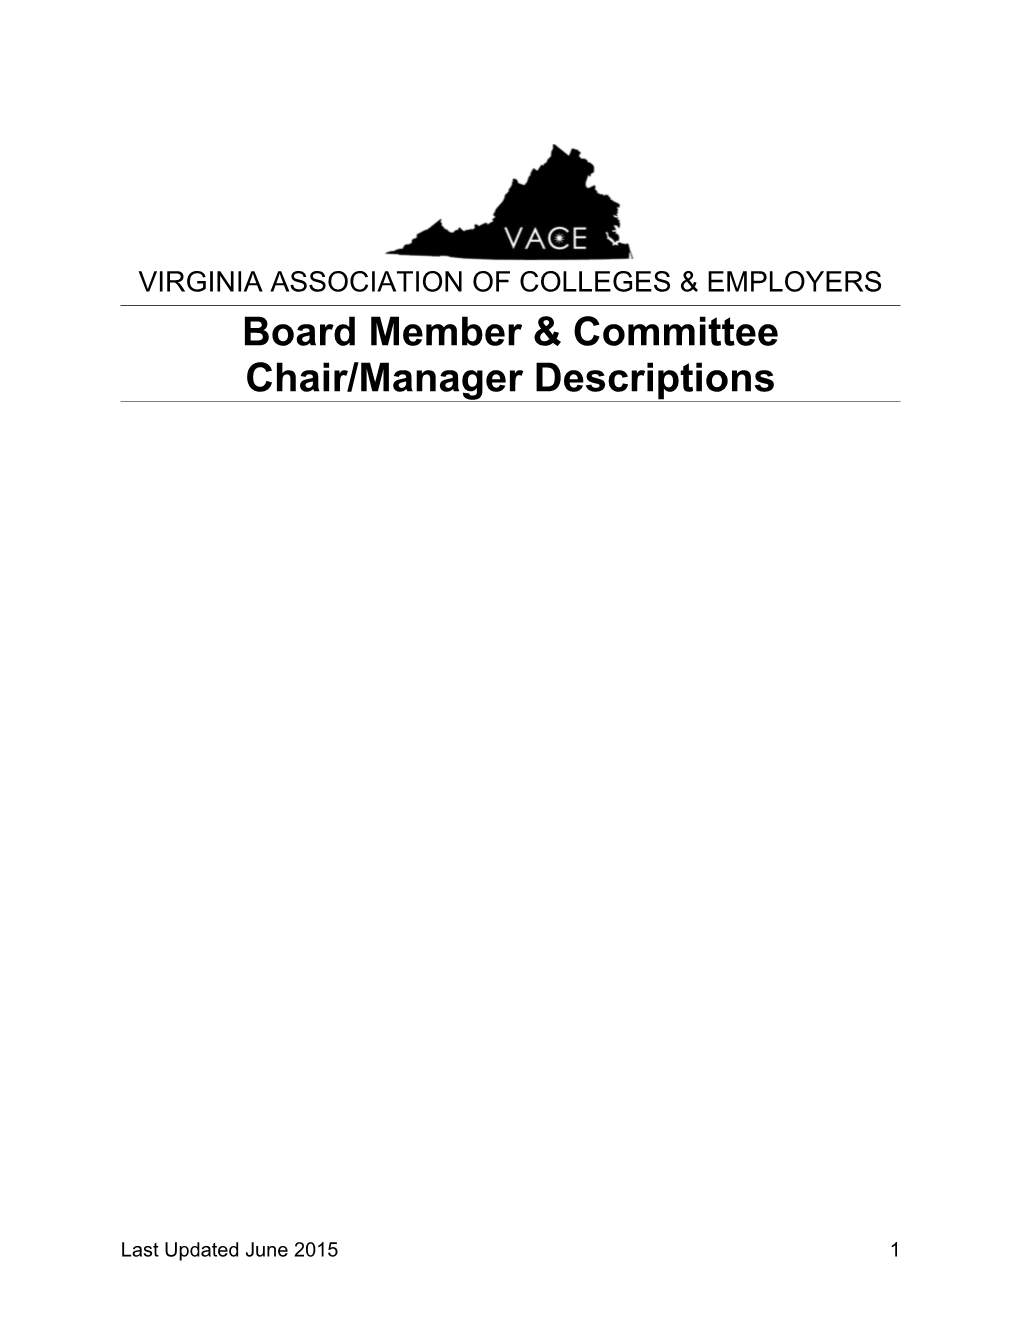 Board Member & Committee Chair/Manager Descriptions